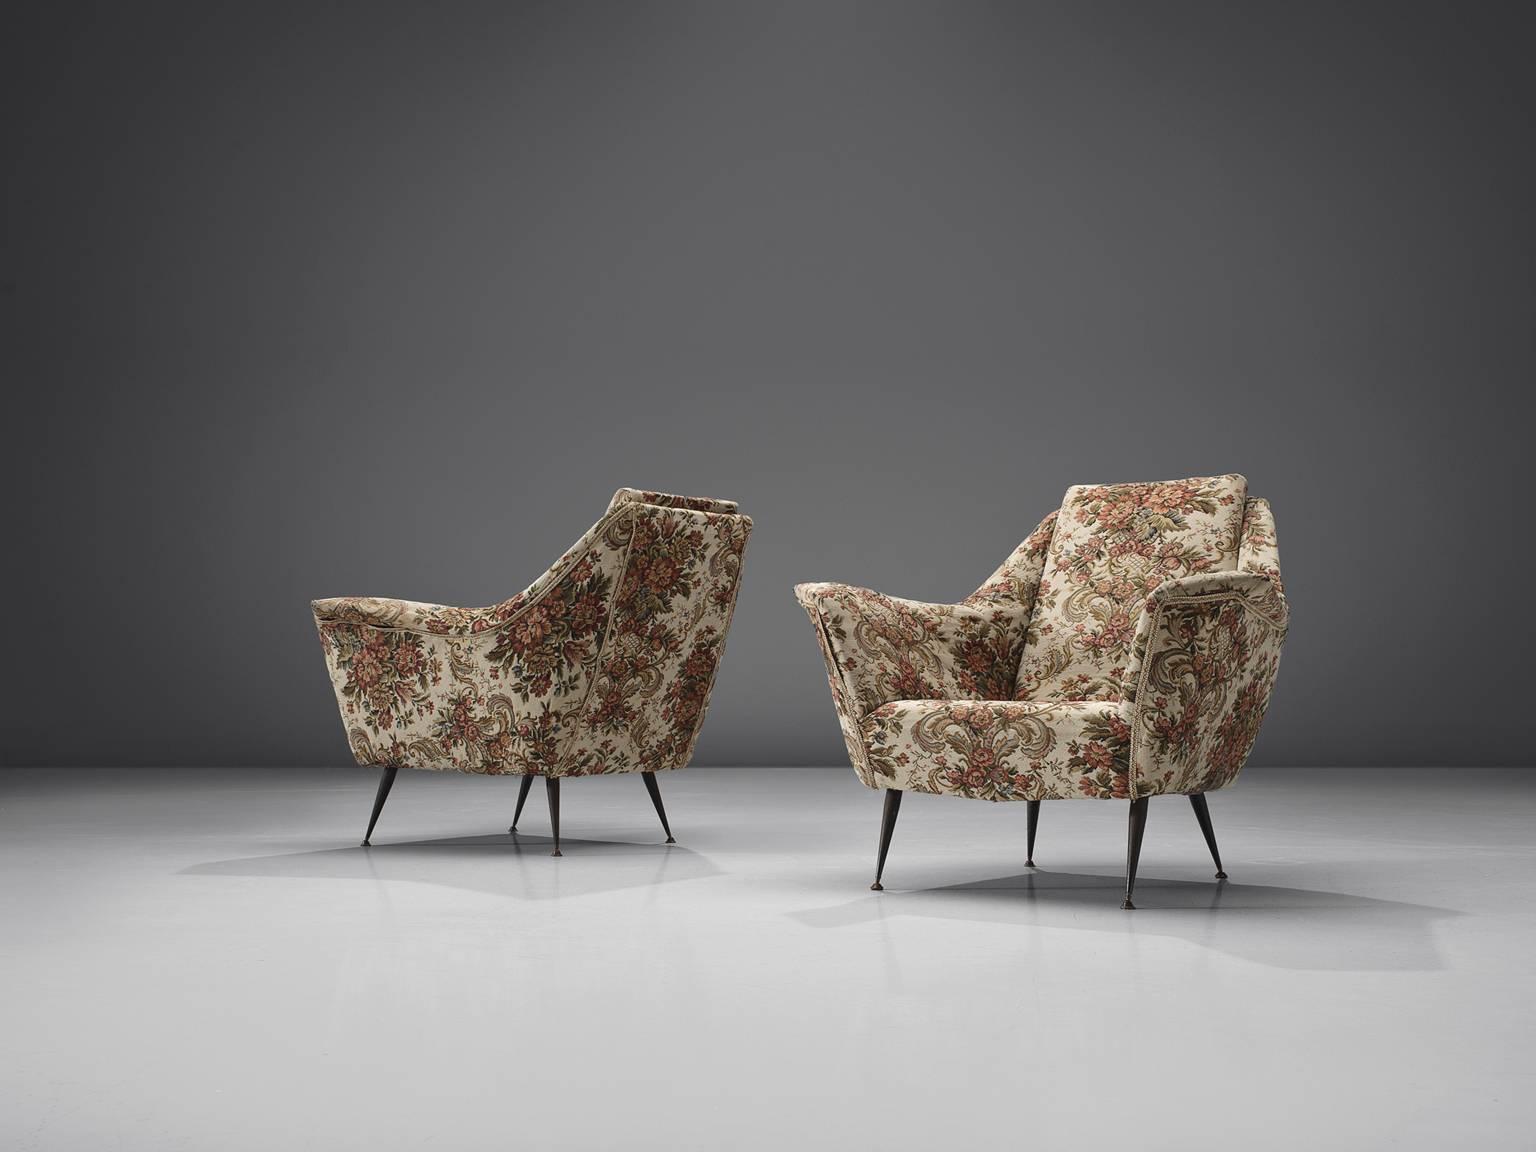 Italian set of lounge chairs, floral fabric, metal legs, brass feet, Italy, 1950s.

This set of chairs is an iconic example of Italian design from the 1950s. The design is on the one hand simplistic, with elegant, subtle lines. On the other hand